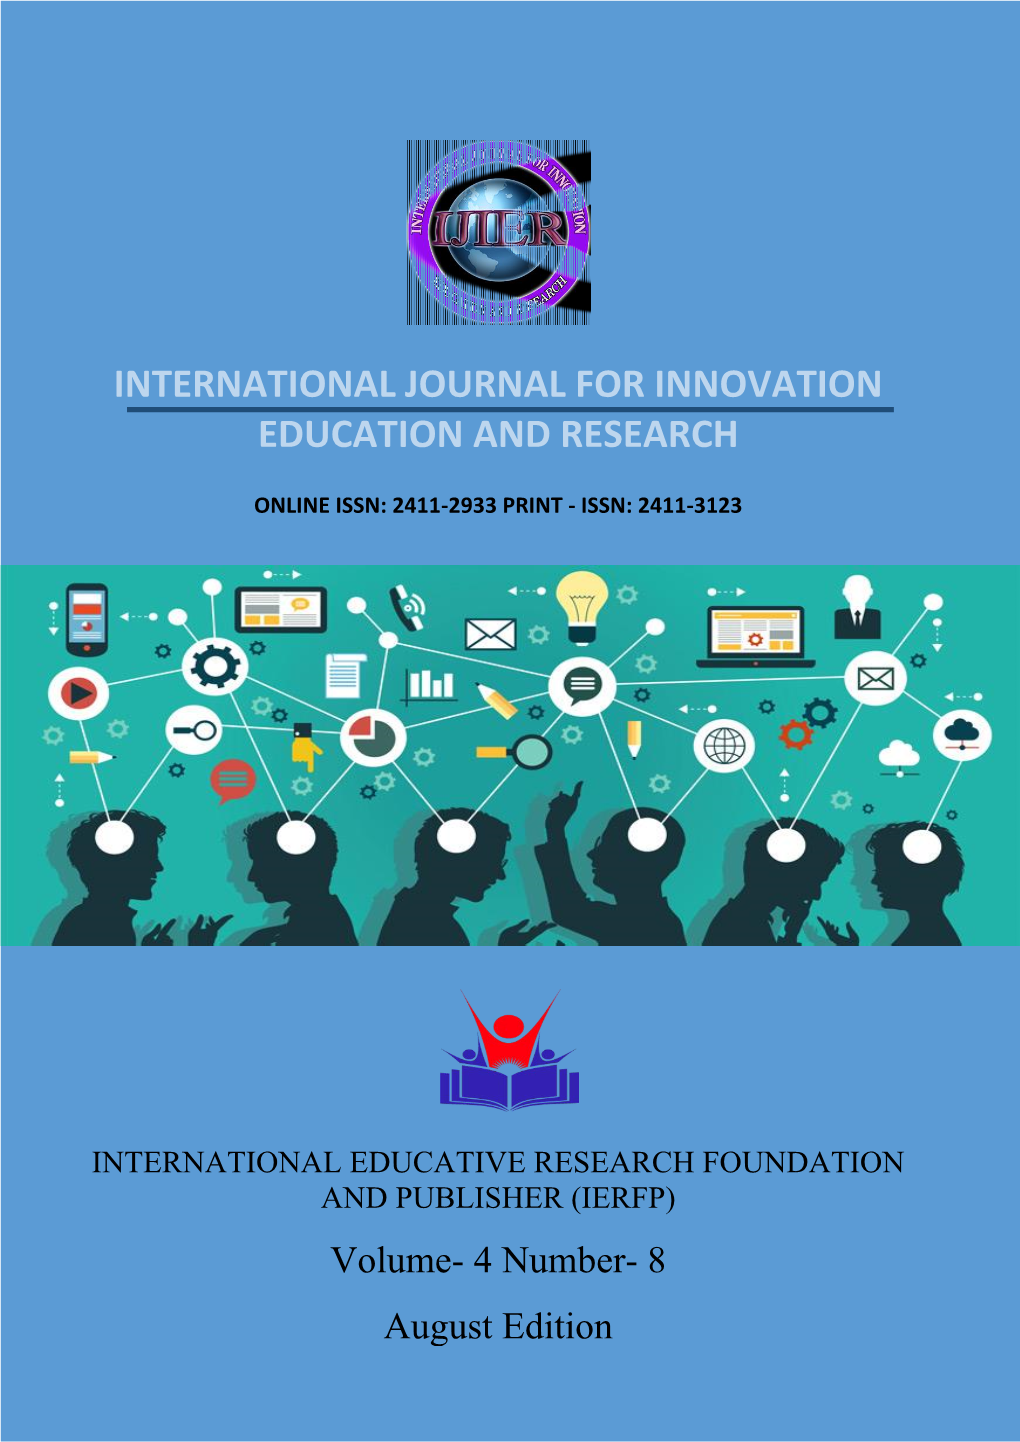 International Educative Research Foundation and Publisher (Ierfp)